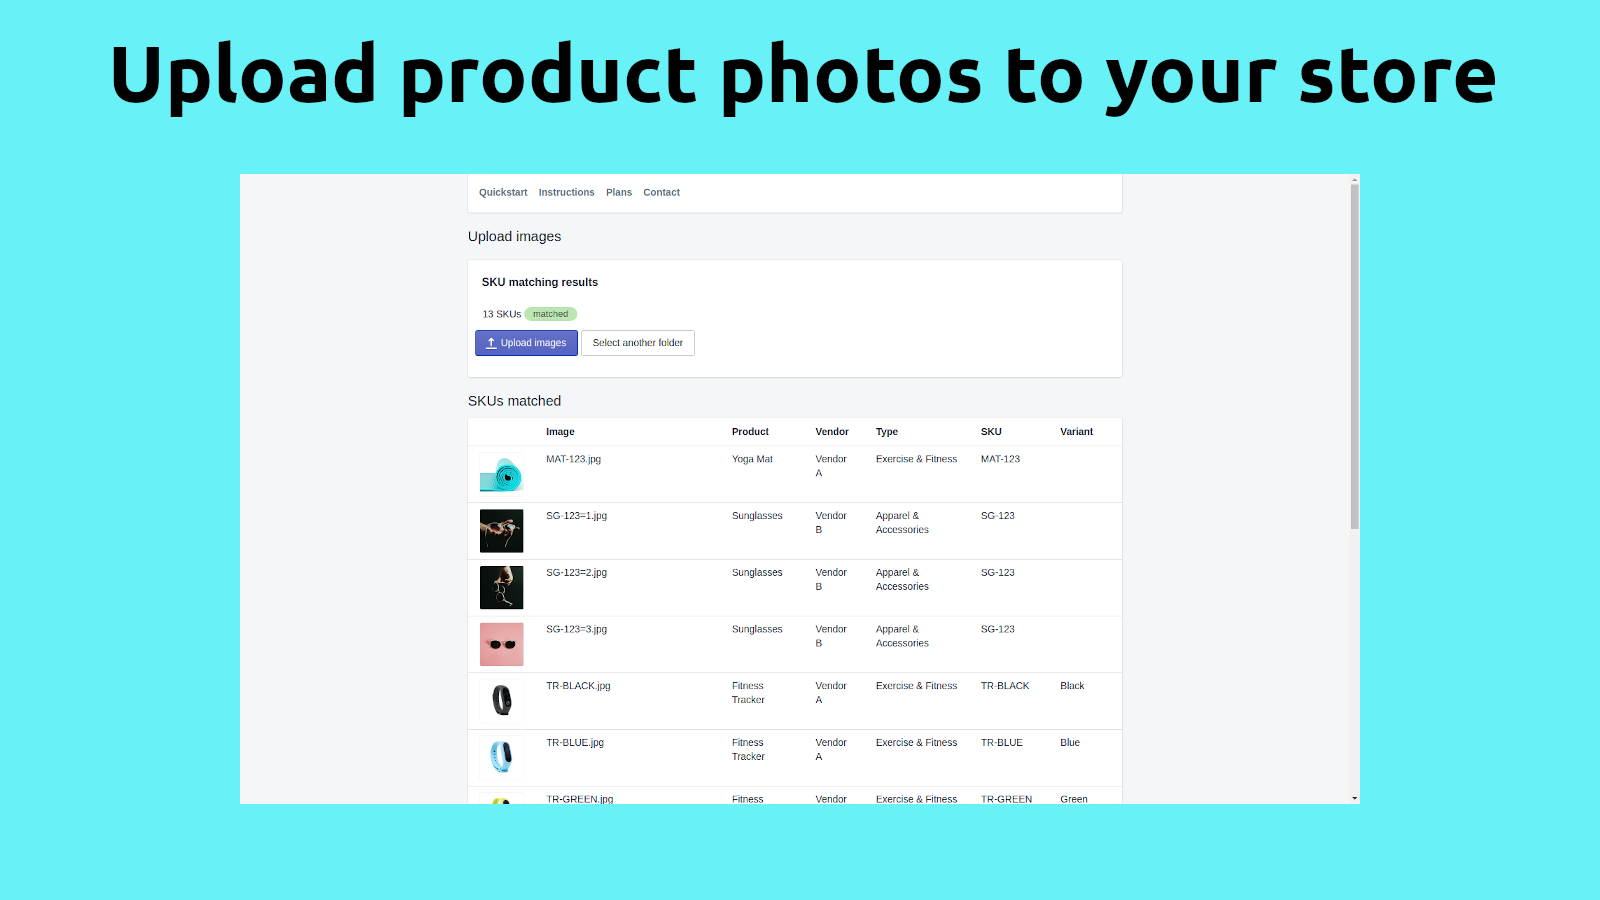 Upload product photos to store